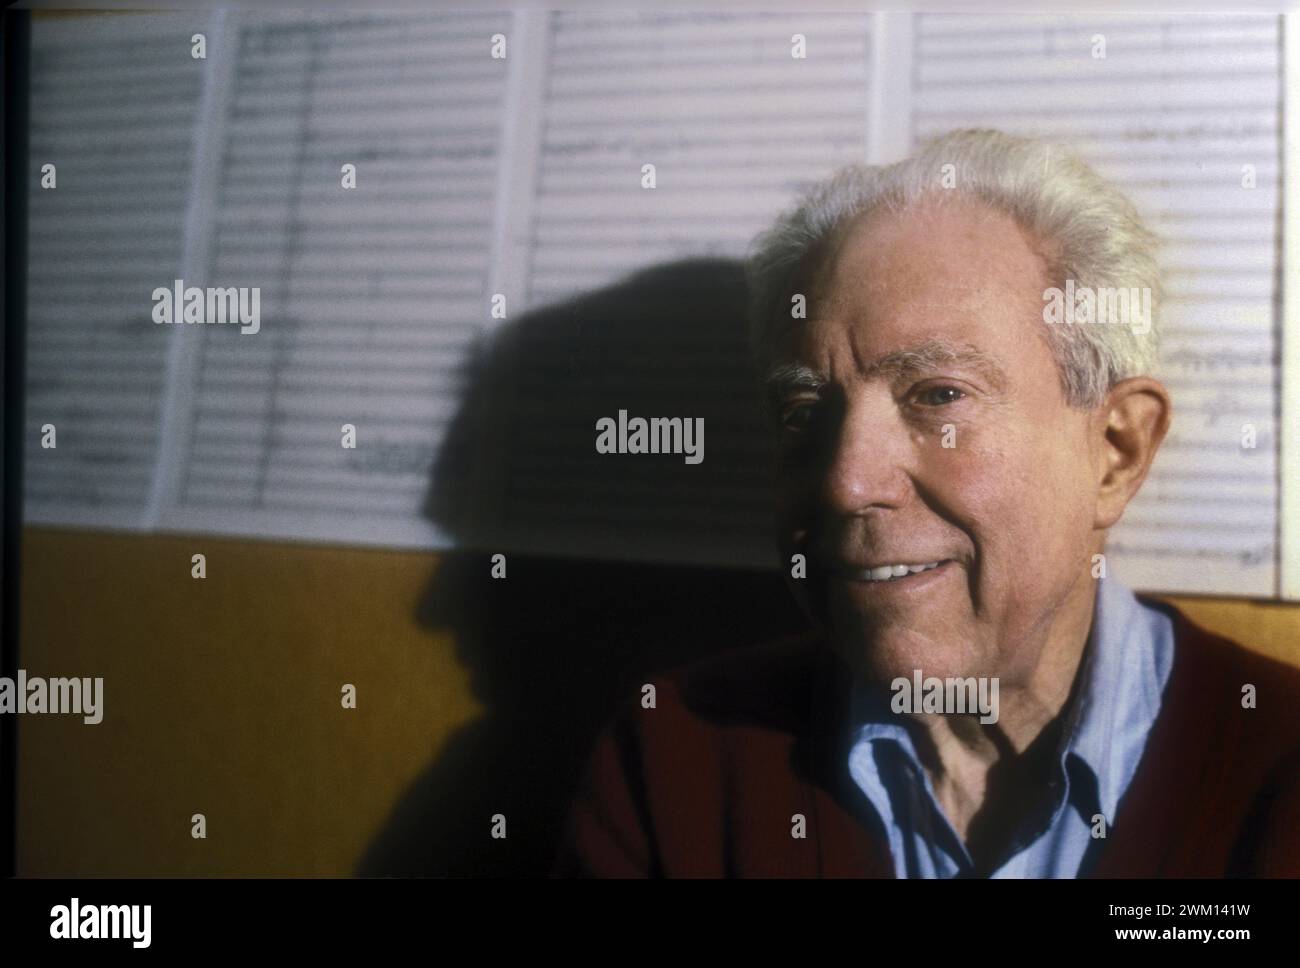 3828000 Elliott Carter; (add.info.: Rome, about 1980. American composer Elliott Carter / Rome, 1980. Il compositore Elliott Carter); © Marcello Mencarini. All rights reserved 2024. Stock Photo